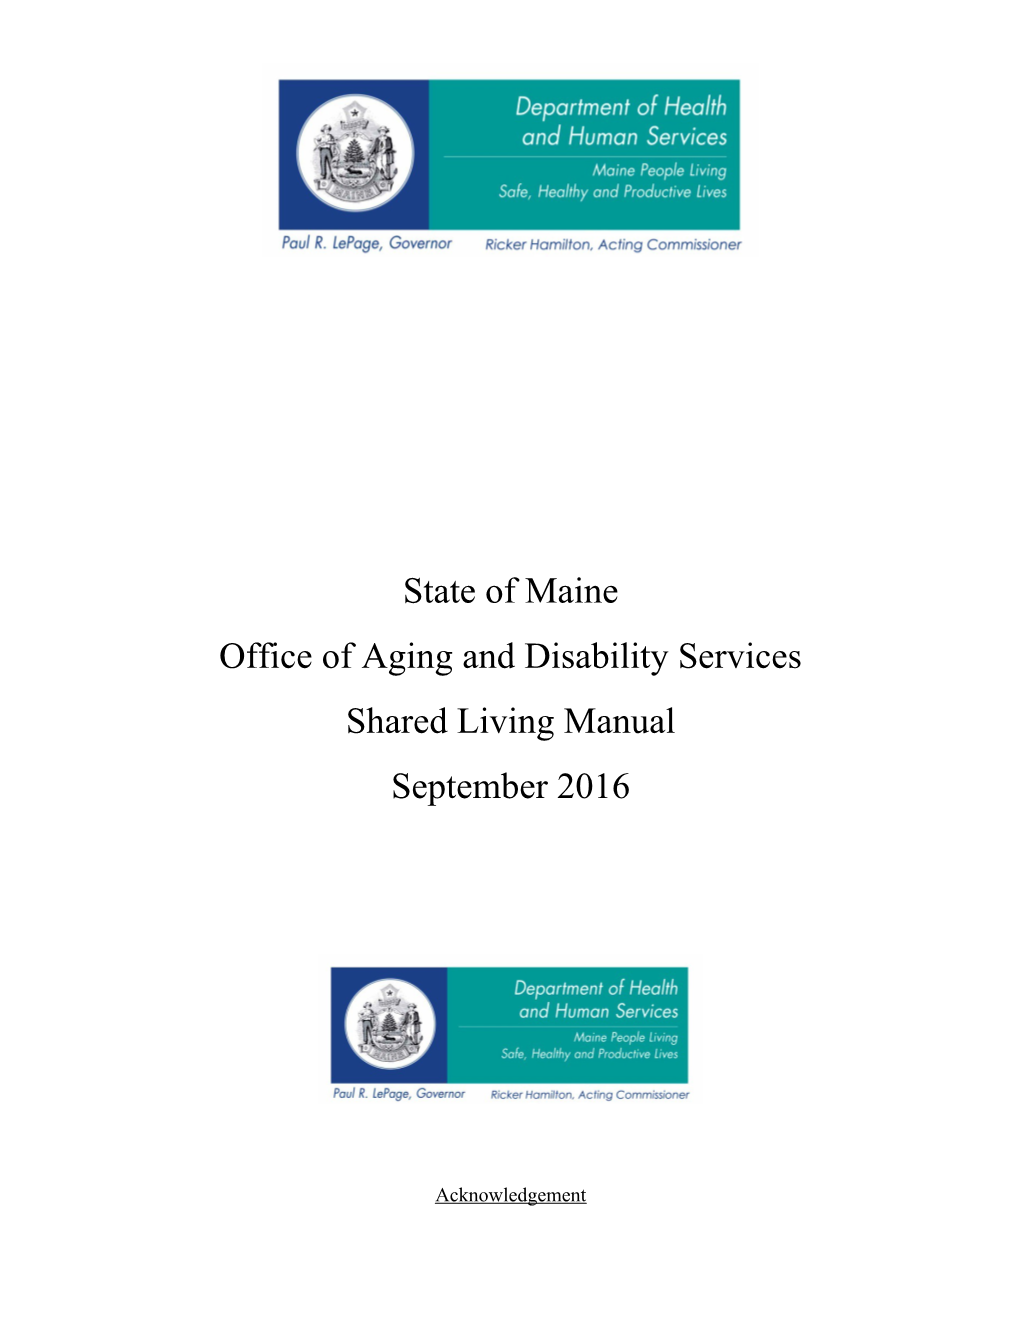 Department of Health and Human Services * Office of Aging and Disabilities Services